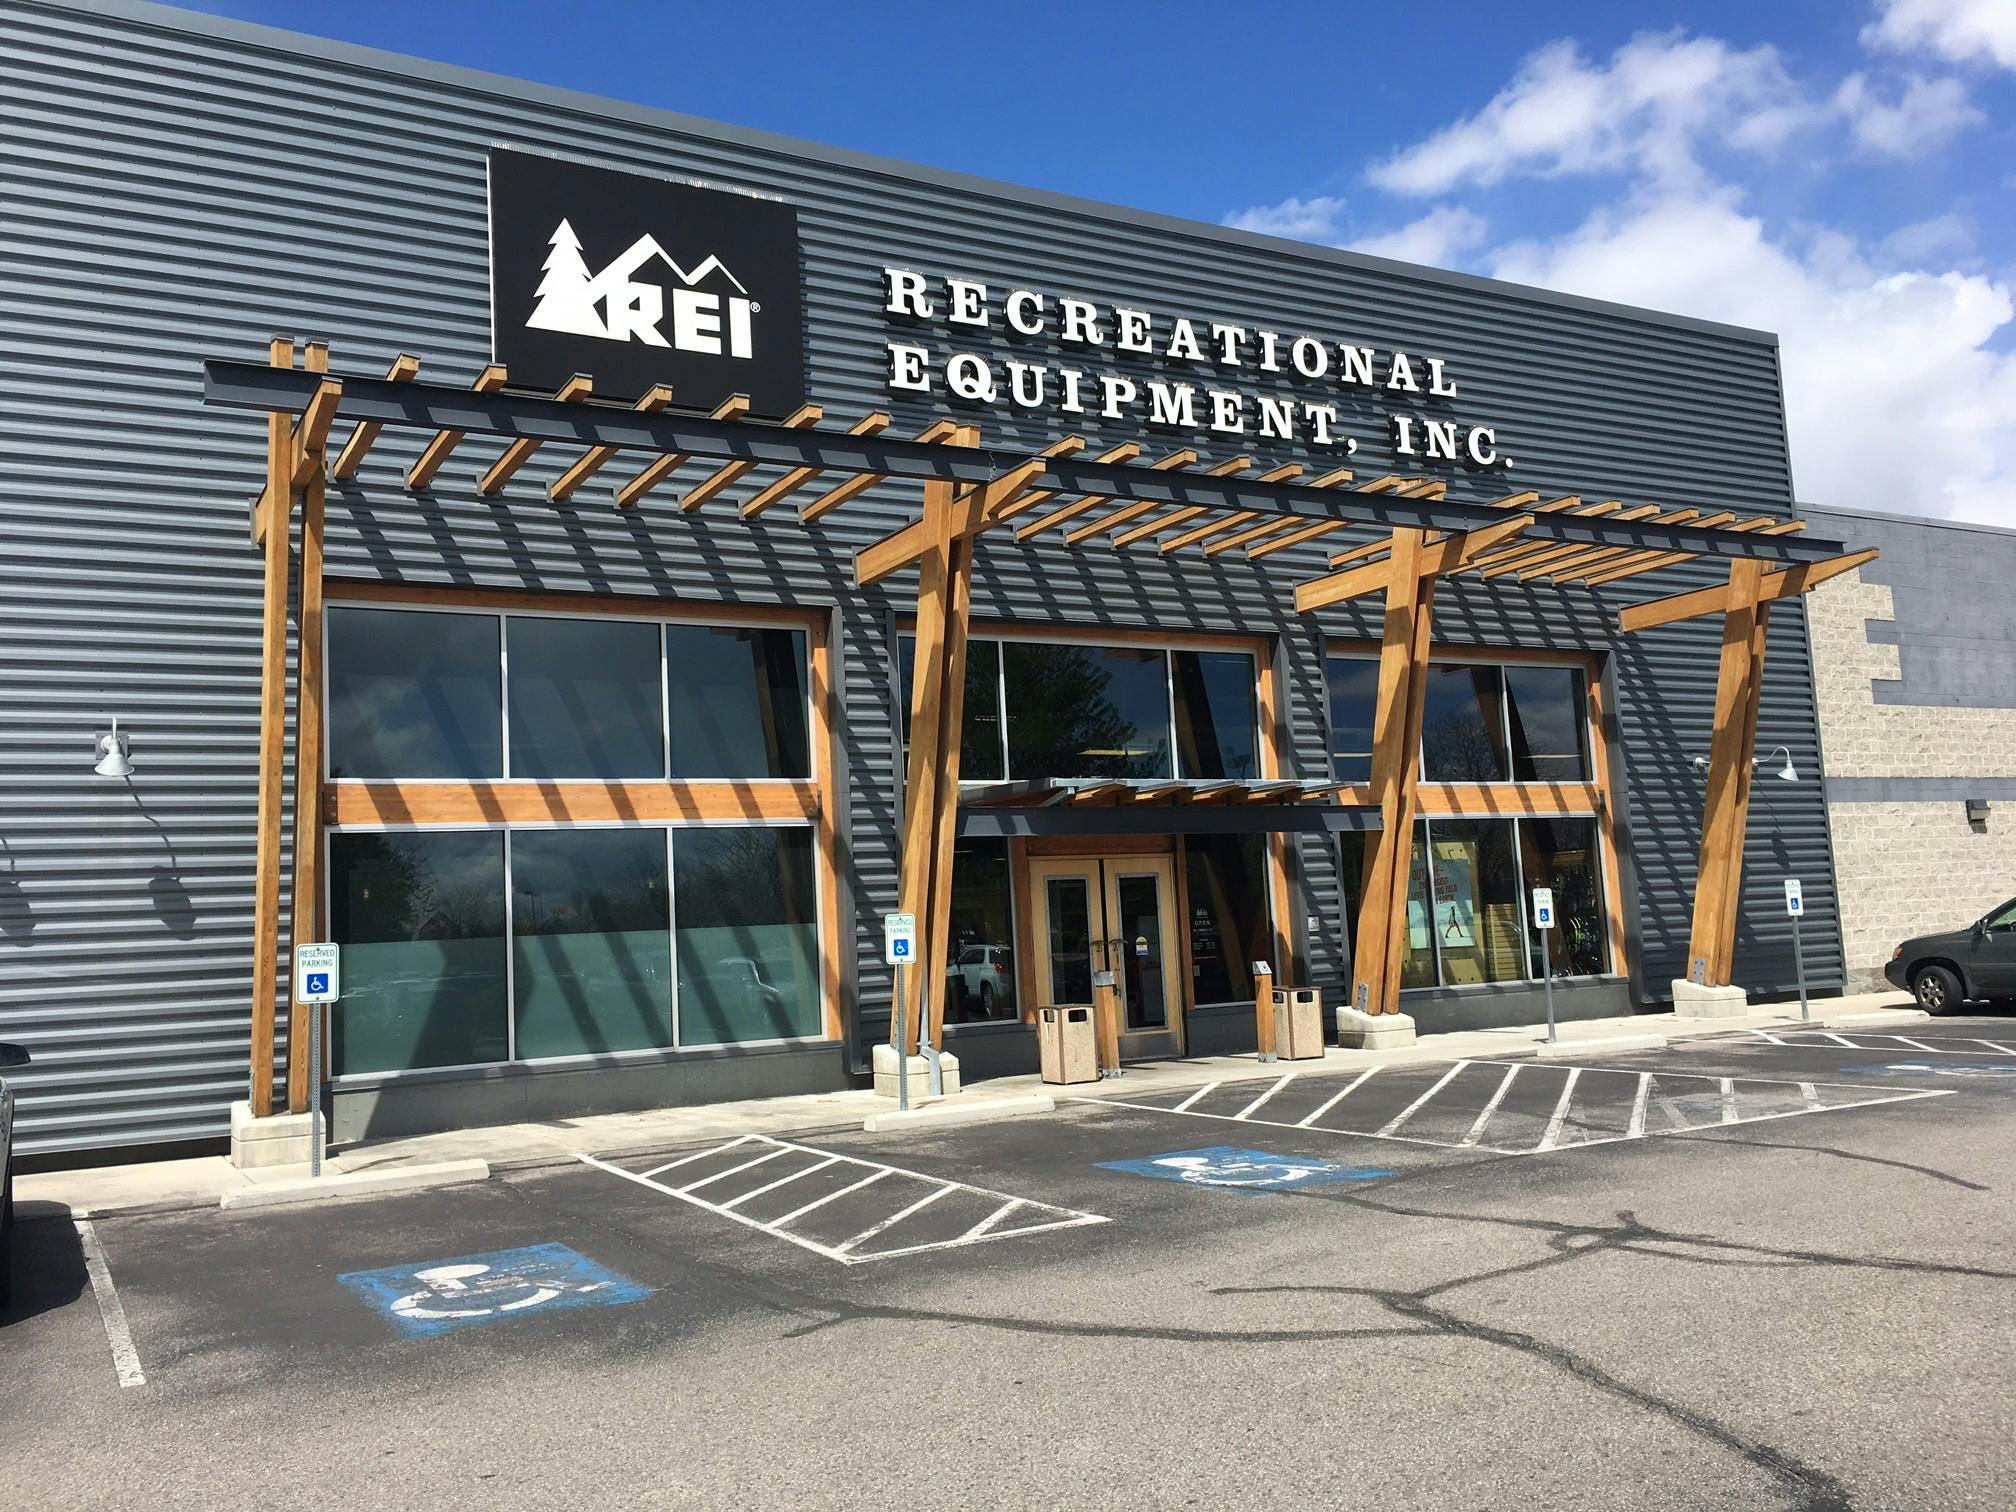 A REI storefront.